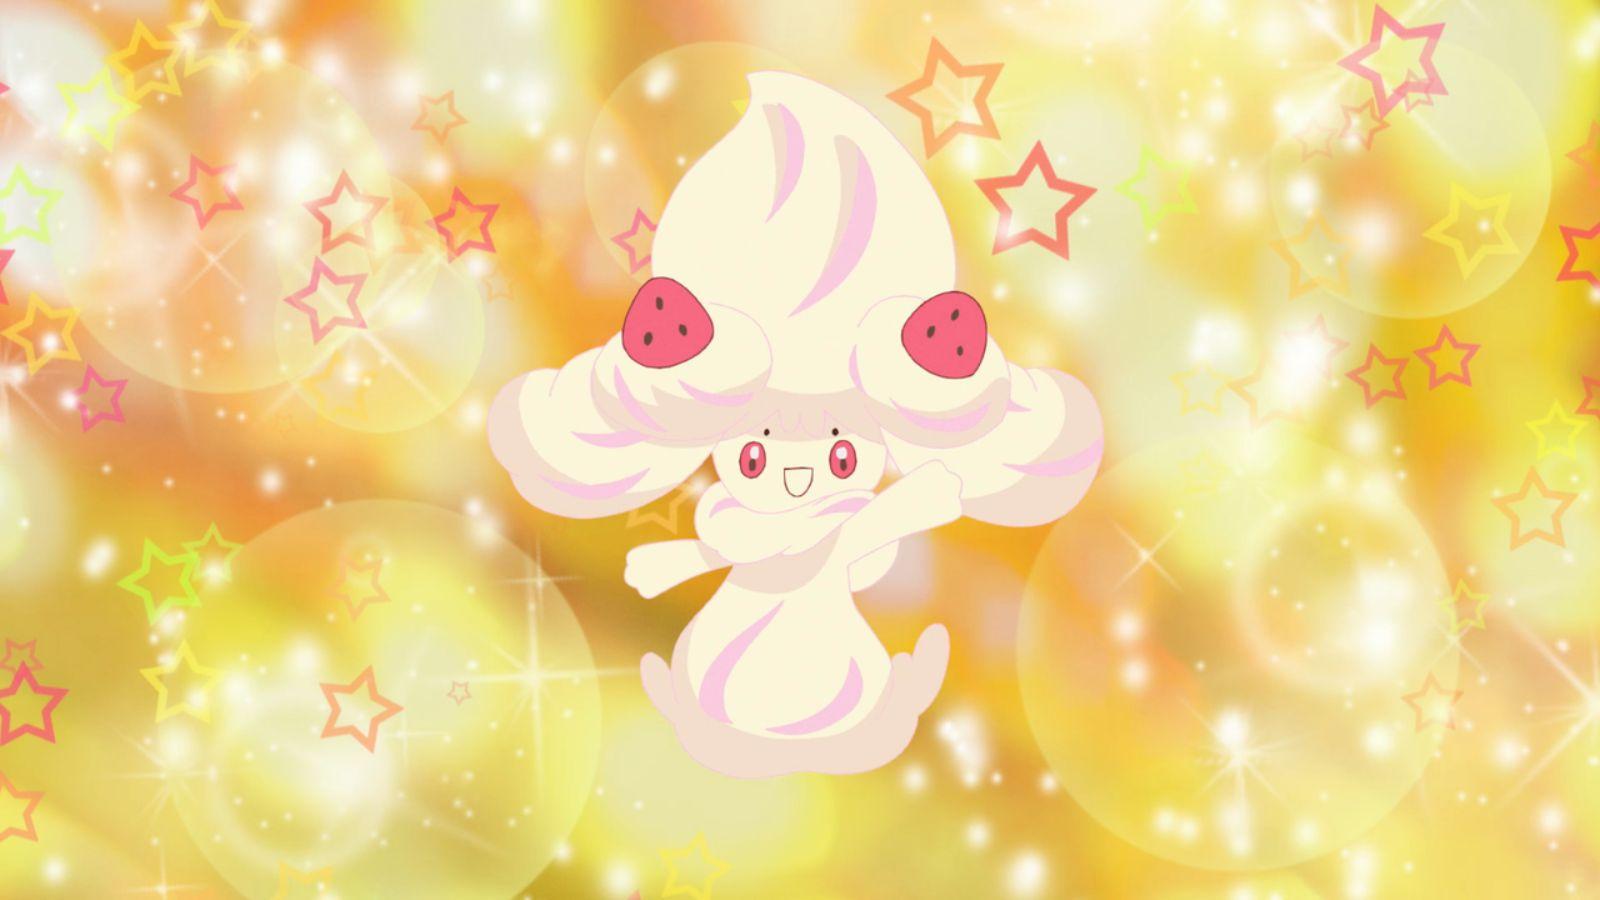 Alcremie Pokemon with sparkly background from anime.